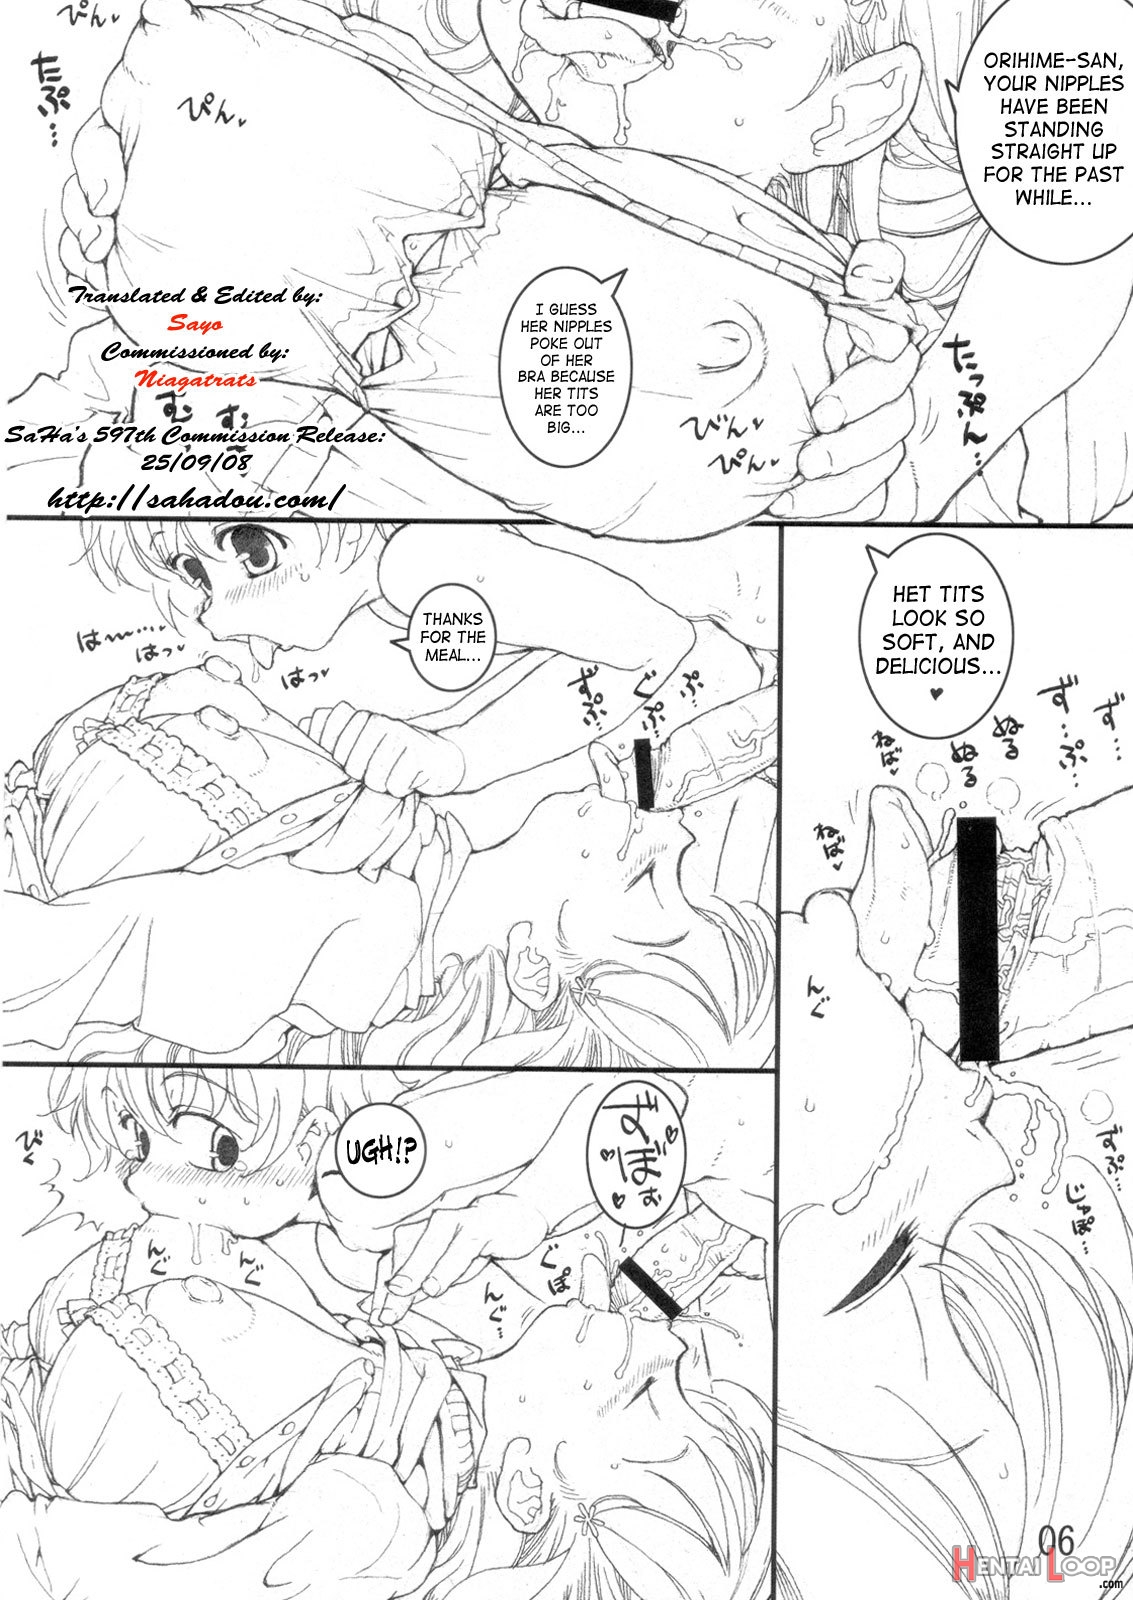 Orihime To Issho! page 5